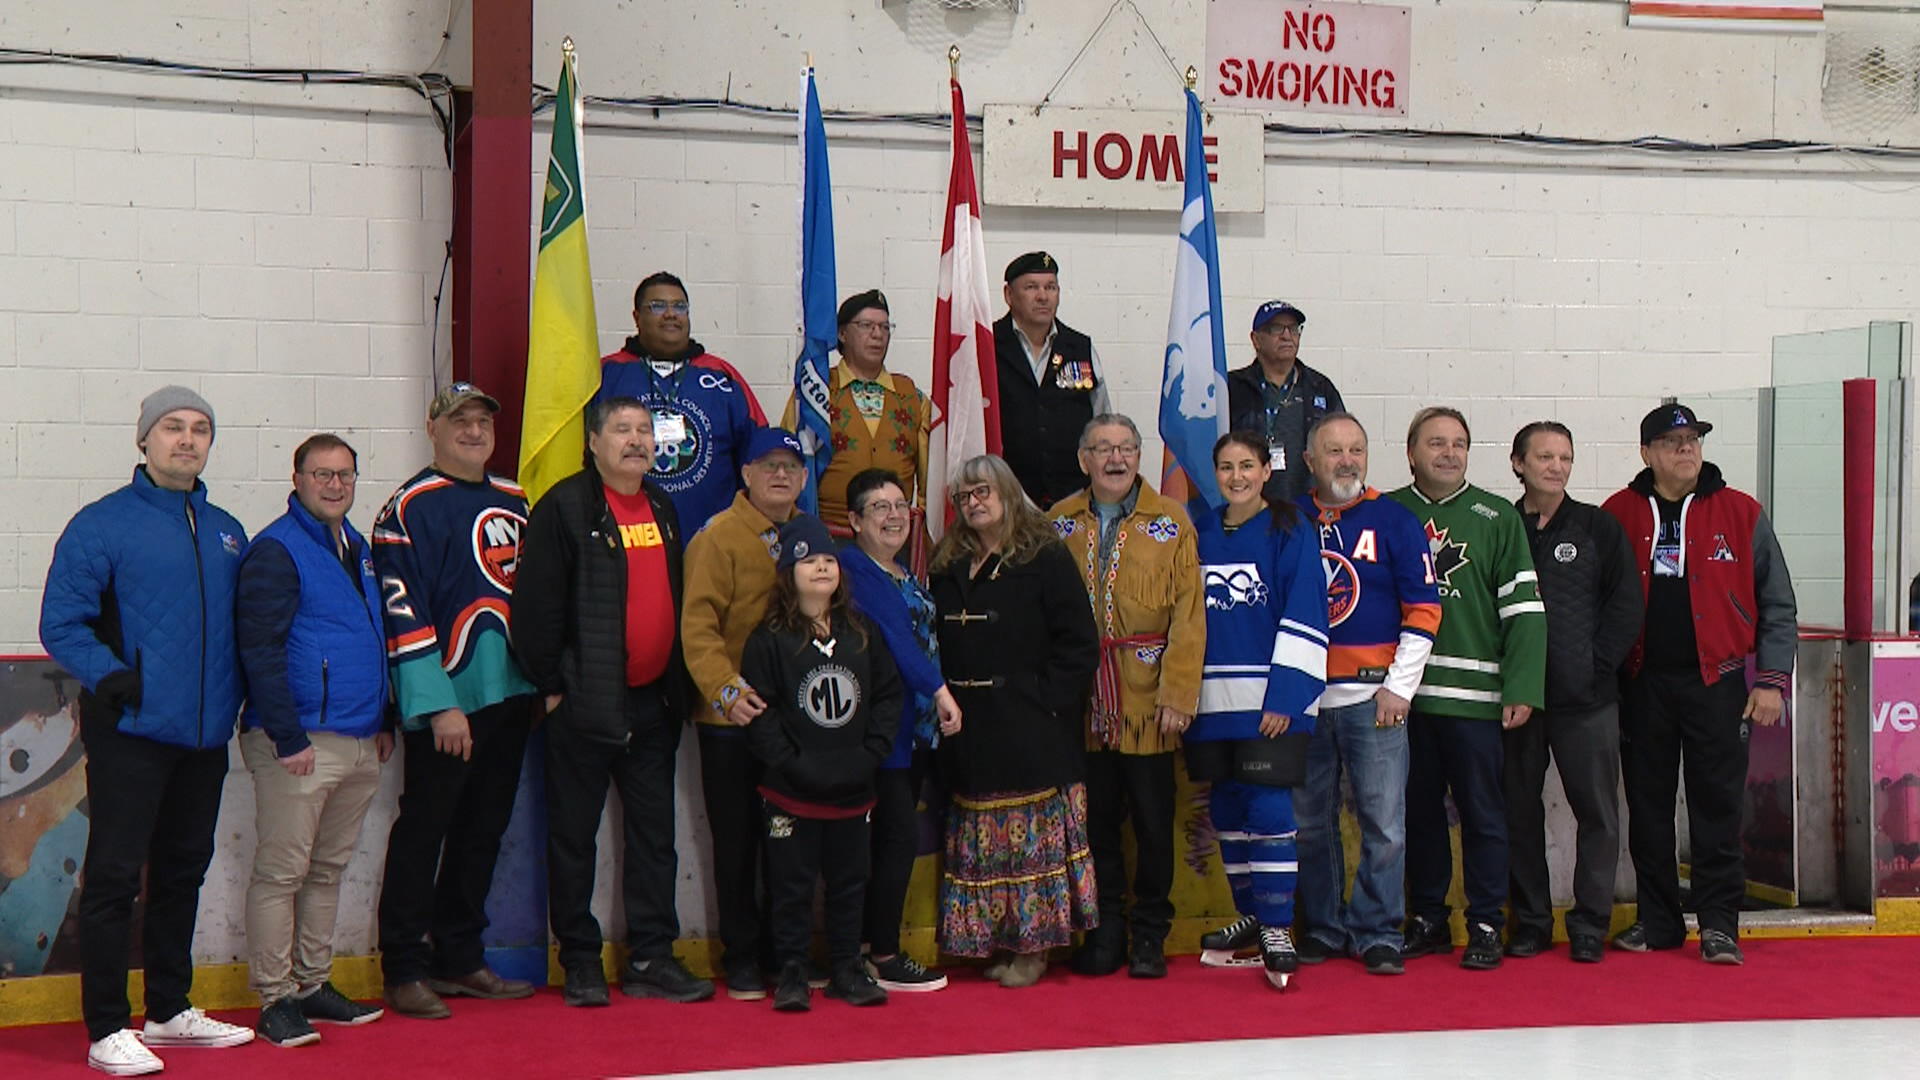 Louis Riel Cup in Saskatoon looks to build reconciliation through hockey